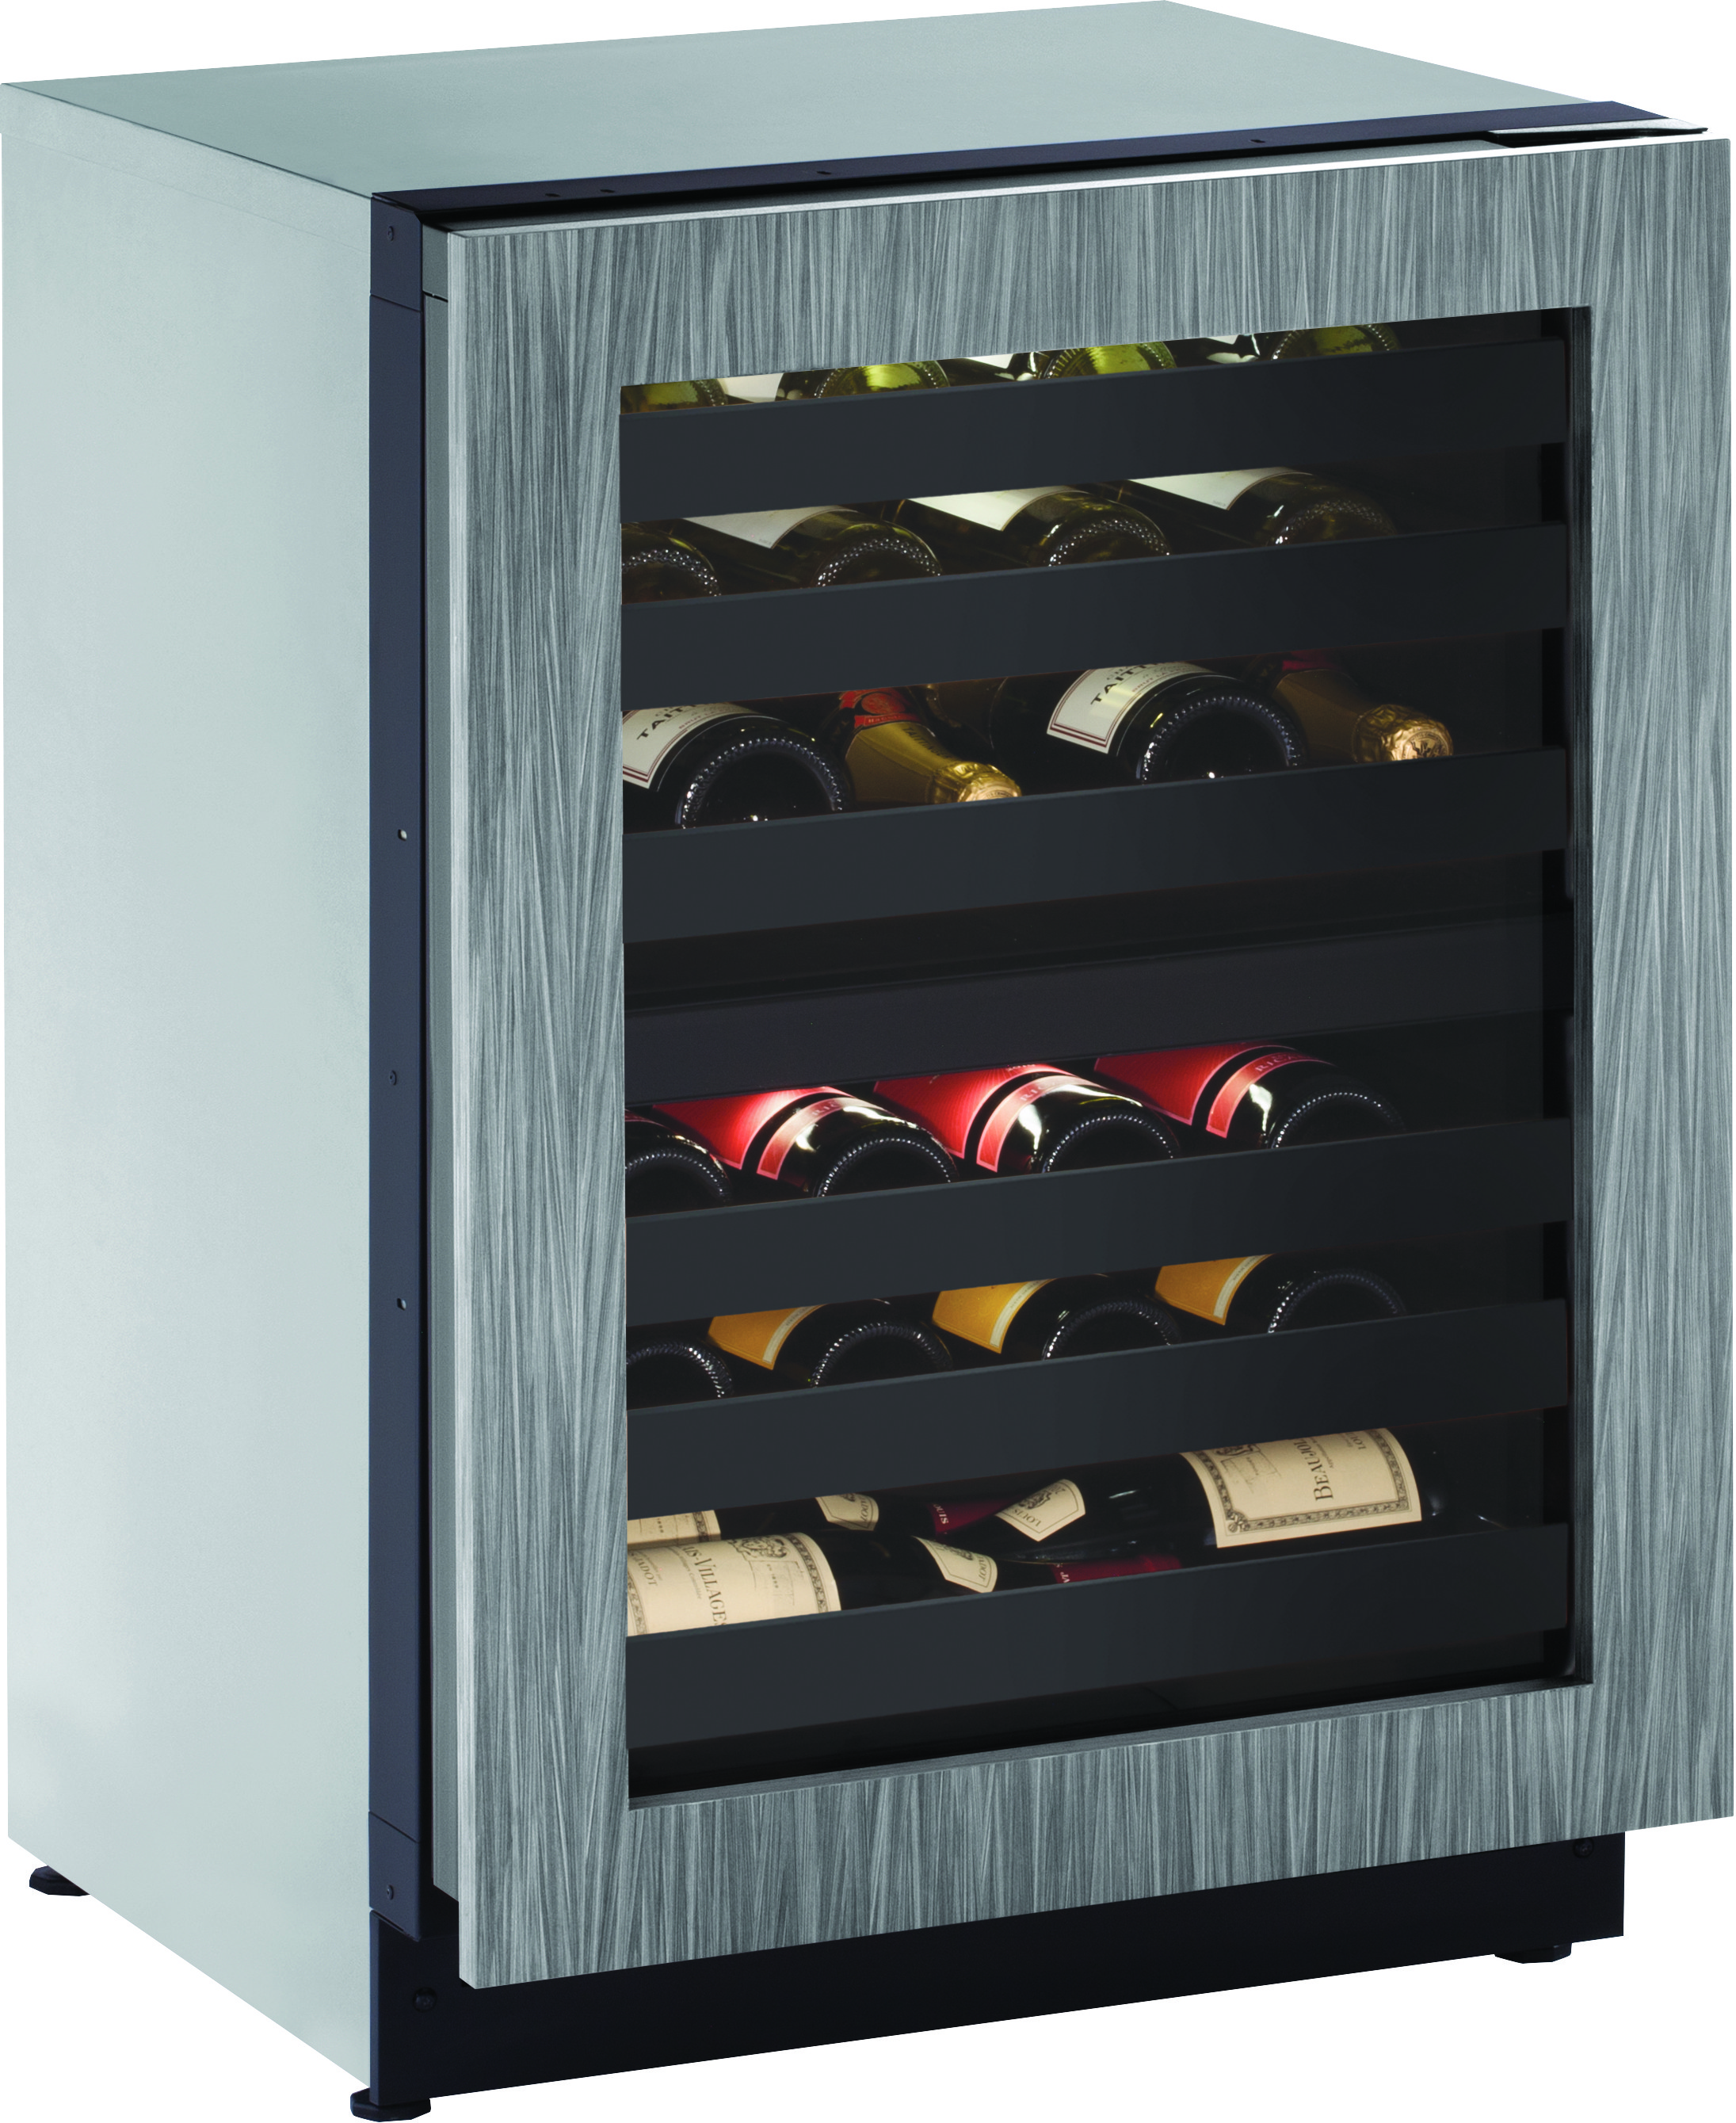 U-Line U-2224WCINT-00A 2000 Series 24 Inch Built-In and Freestanding Single Zone Wine Cooler with 43 Bottle Capacity in Panel Ready 